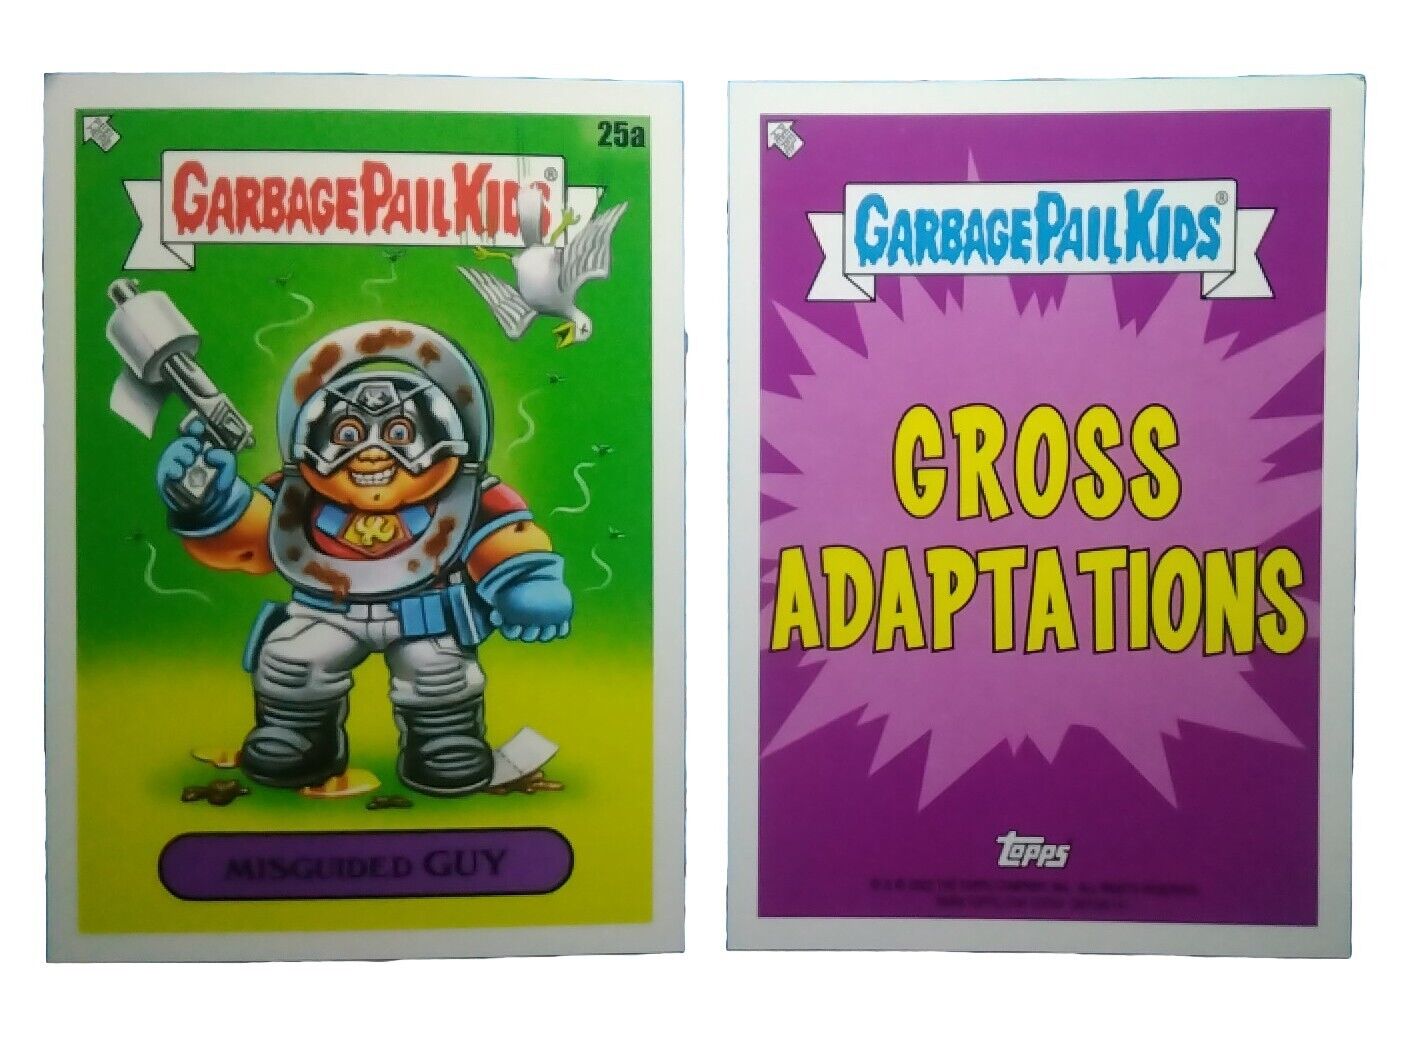 2022 Topps GARBAGE PAIL KIDS book worms • Gross Adaptations MISGUIDED GUY (#25a)